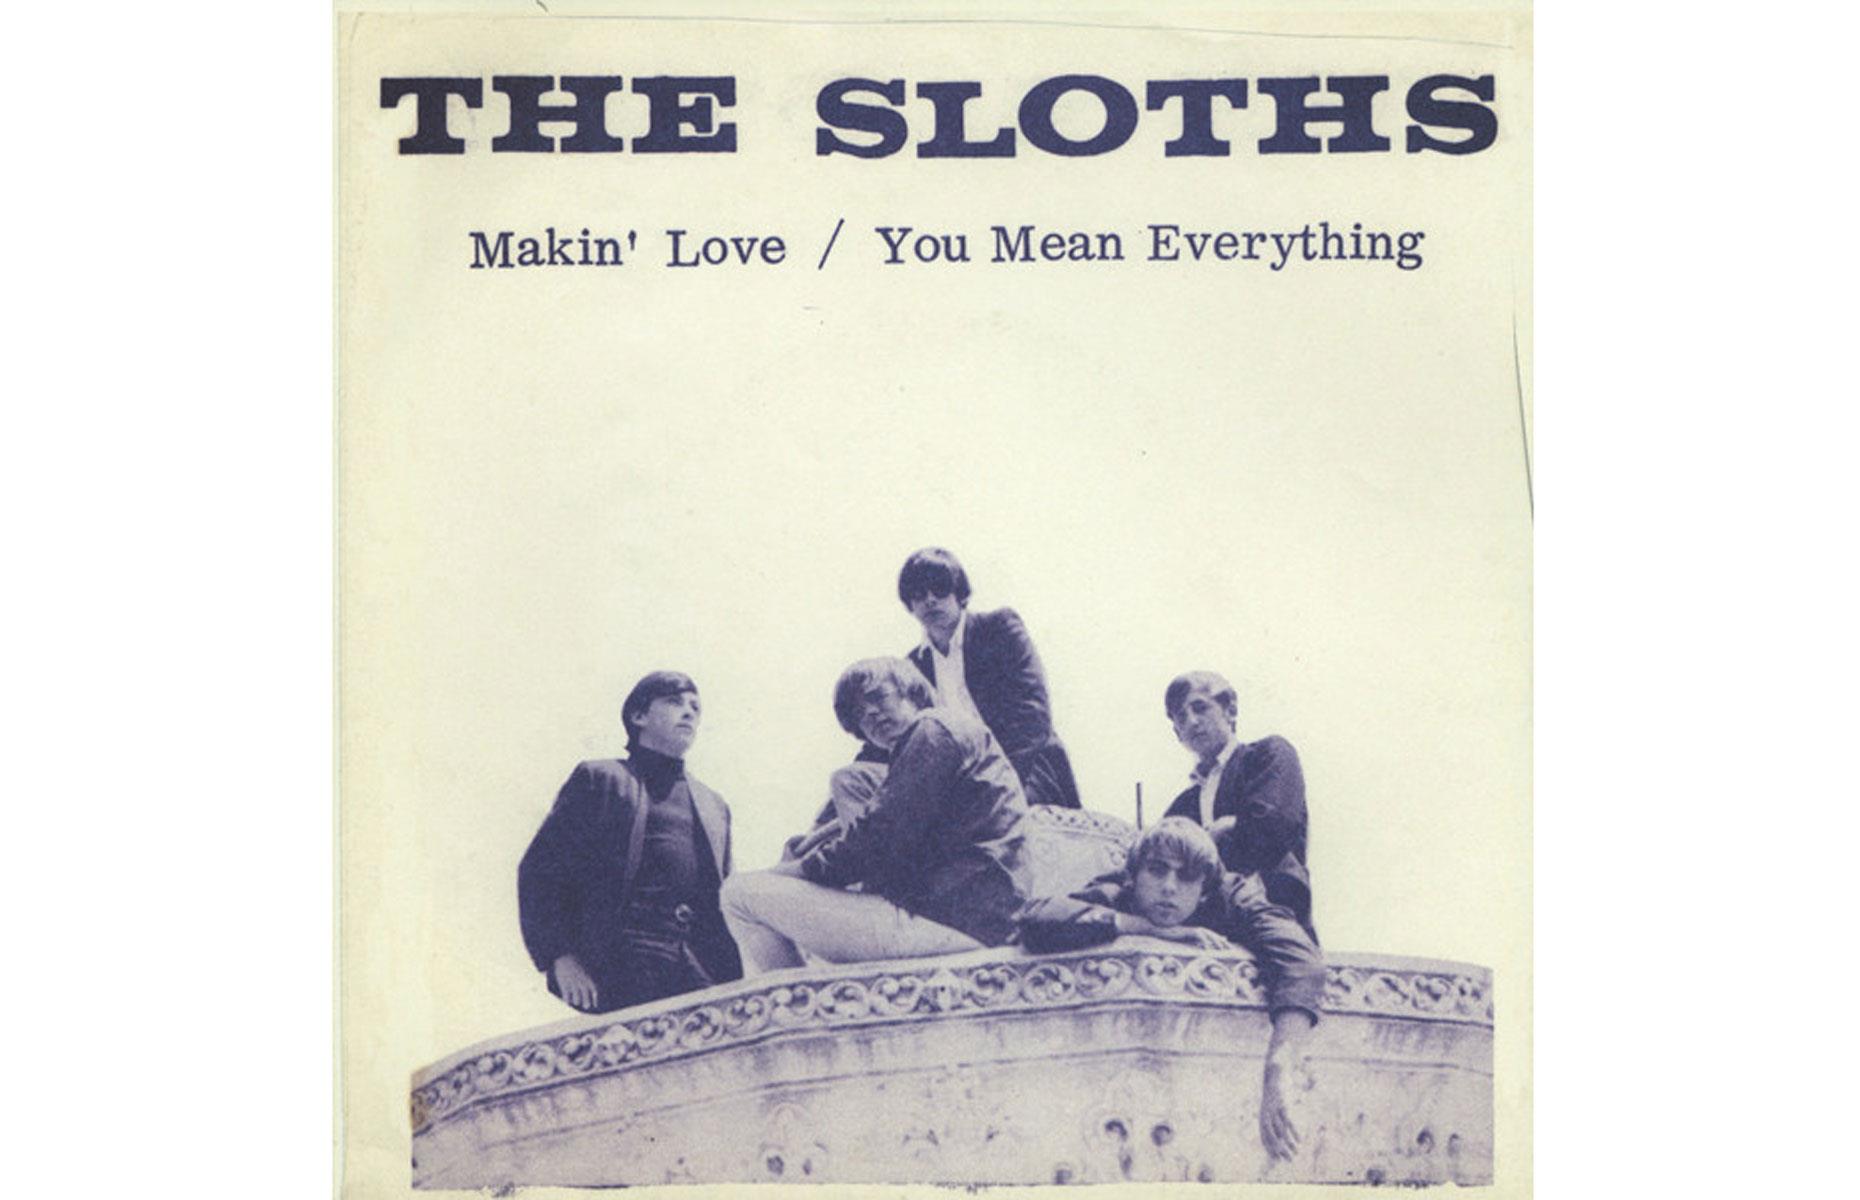 The Sloths – Makin' Love: up to $6,700 (£5,692)